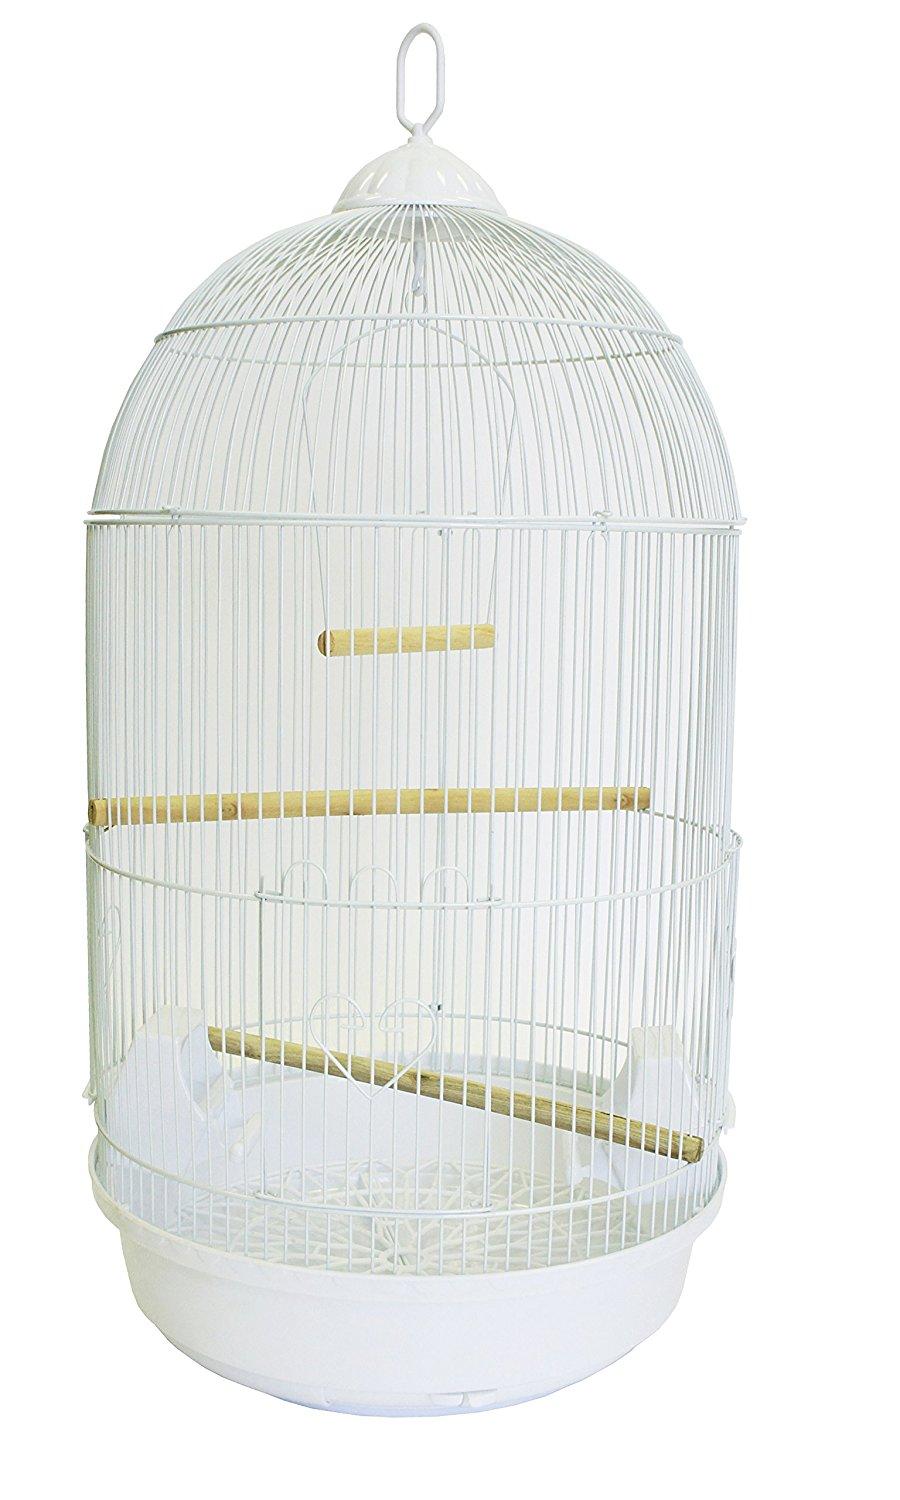 YML A1594 Bar Spacing Round Bird Cage, White, Large